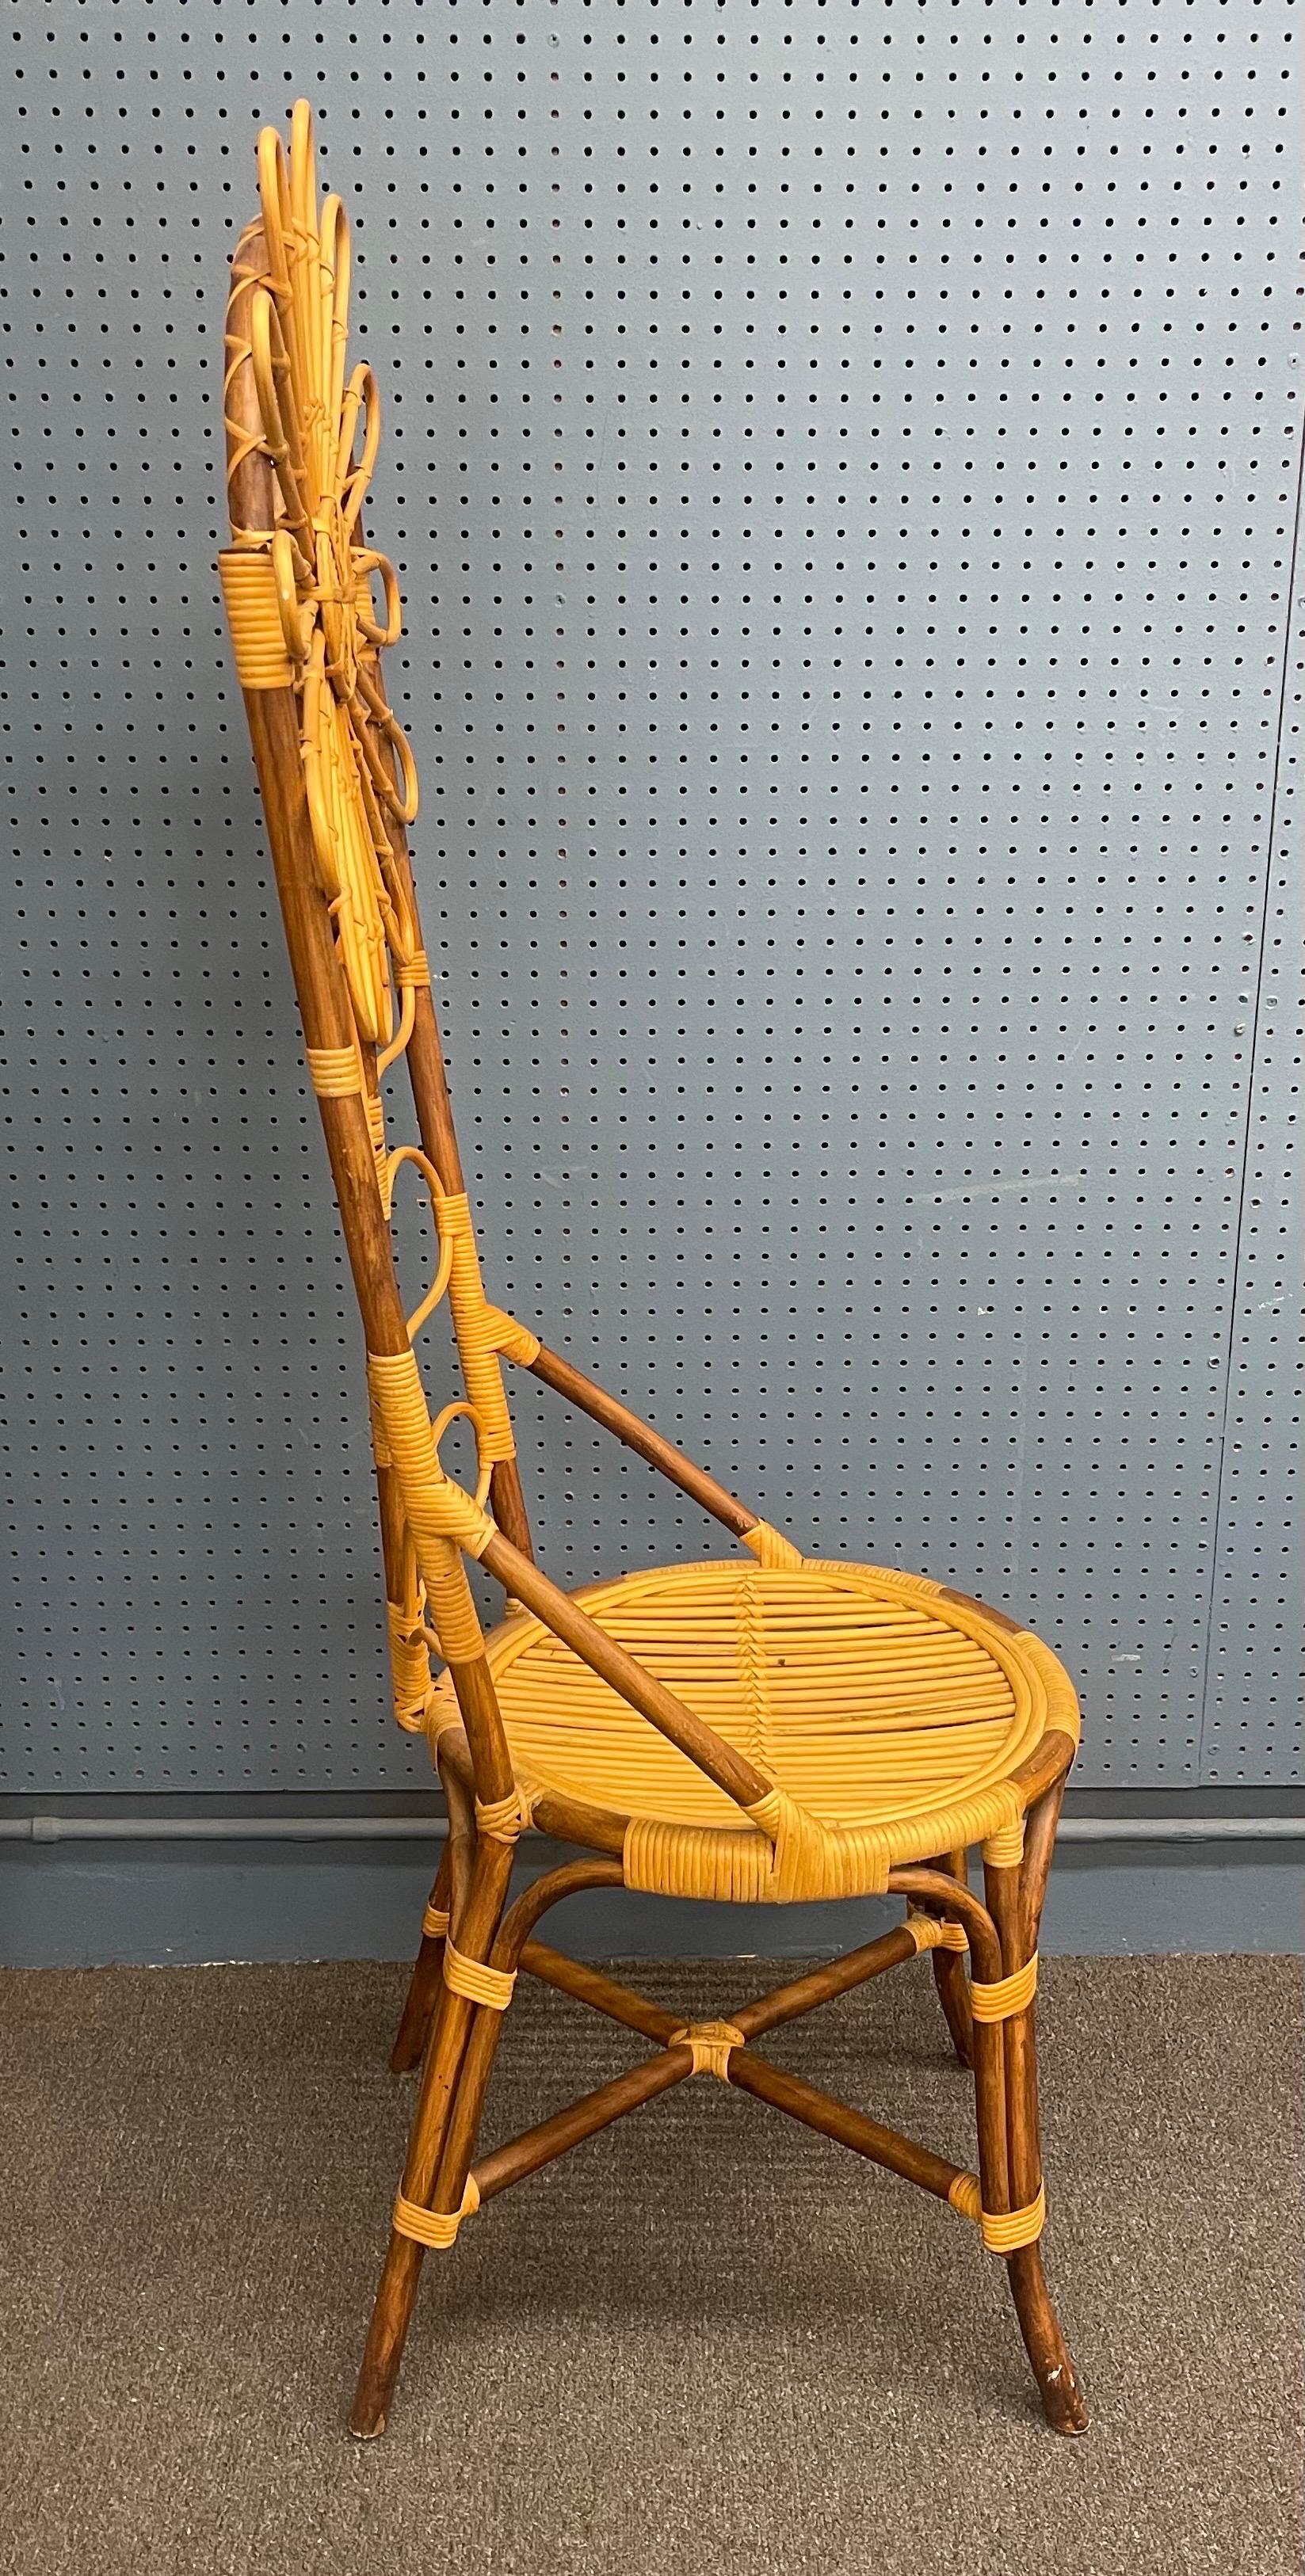 Tall Bamboo Sun Flower Chair In Good Condition For Sale In San Diego, CA